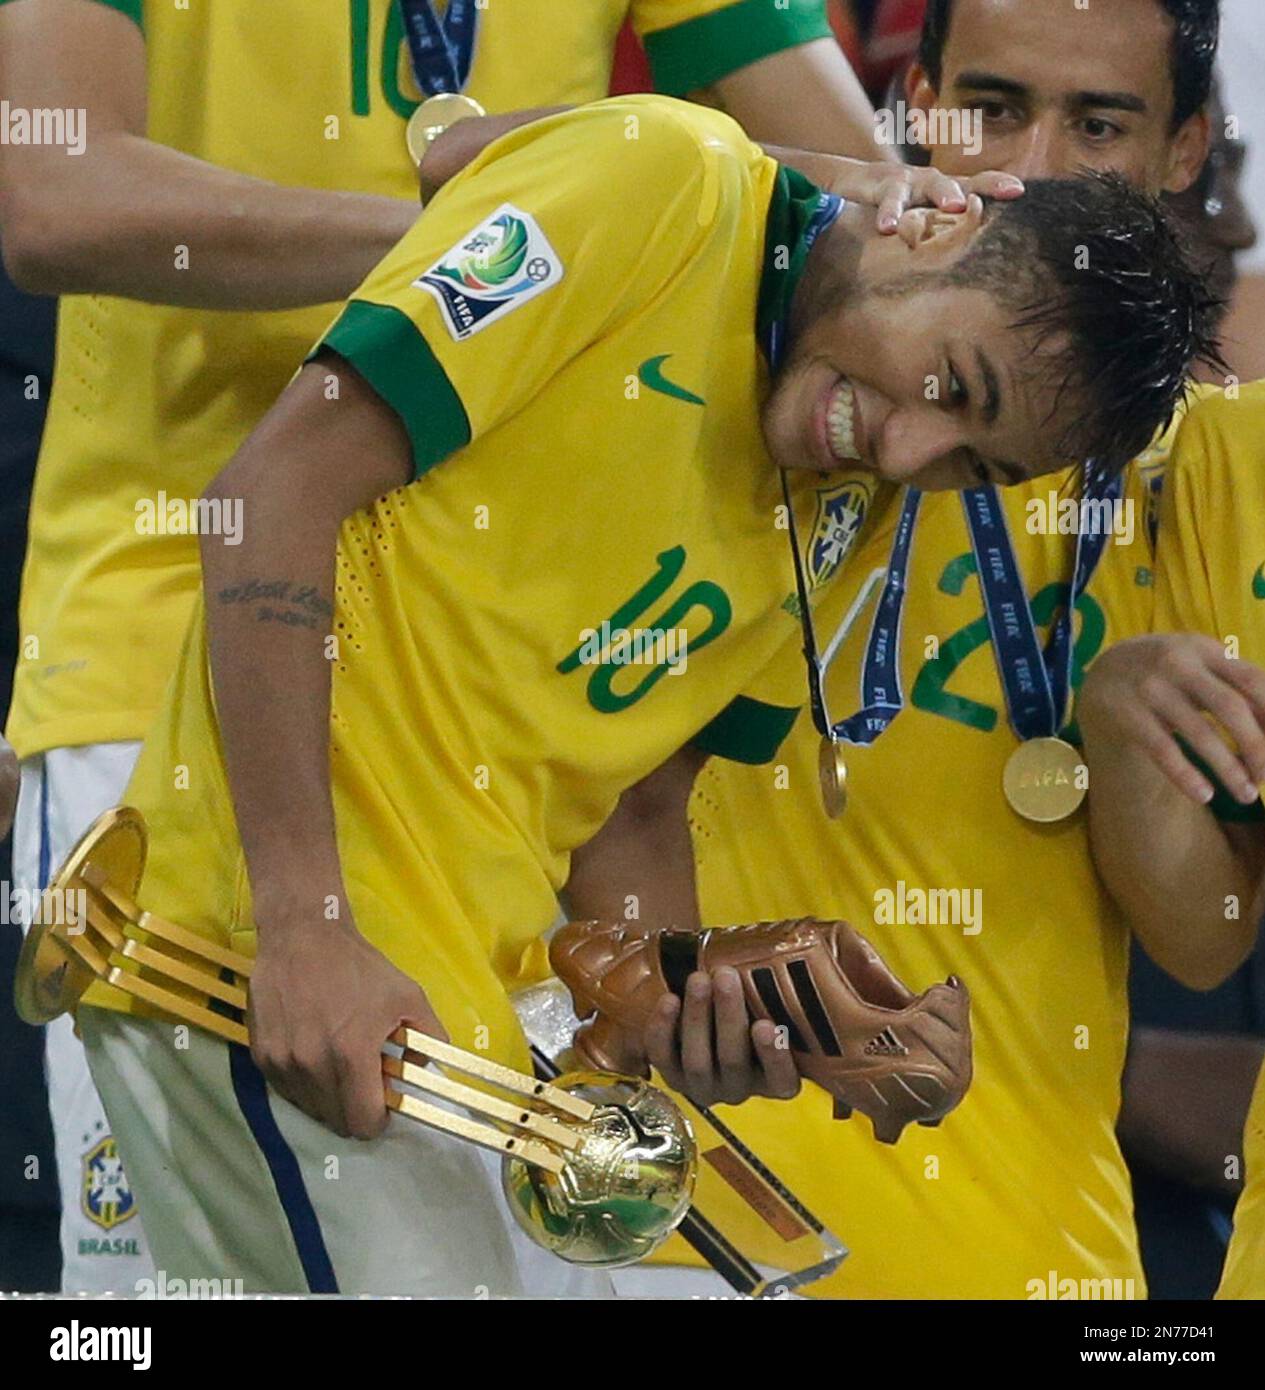 Neymar Joins The Gold Club - SoccerBible